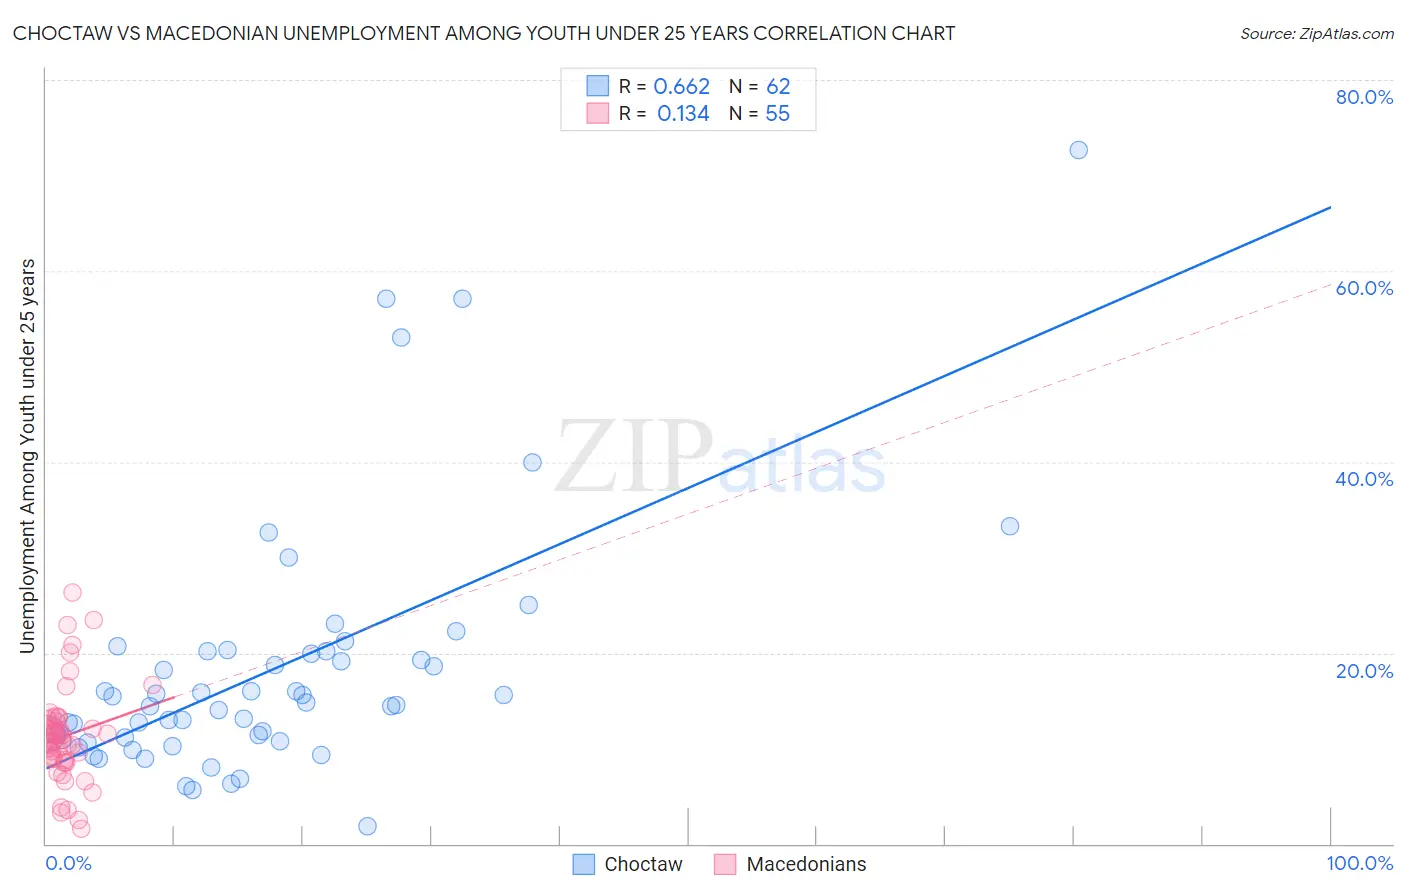 Choctaw vs Macedonian Unemployment Among Youth under 25 years